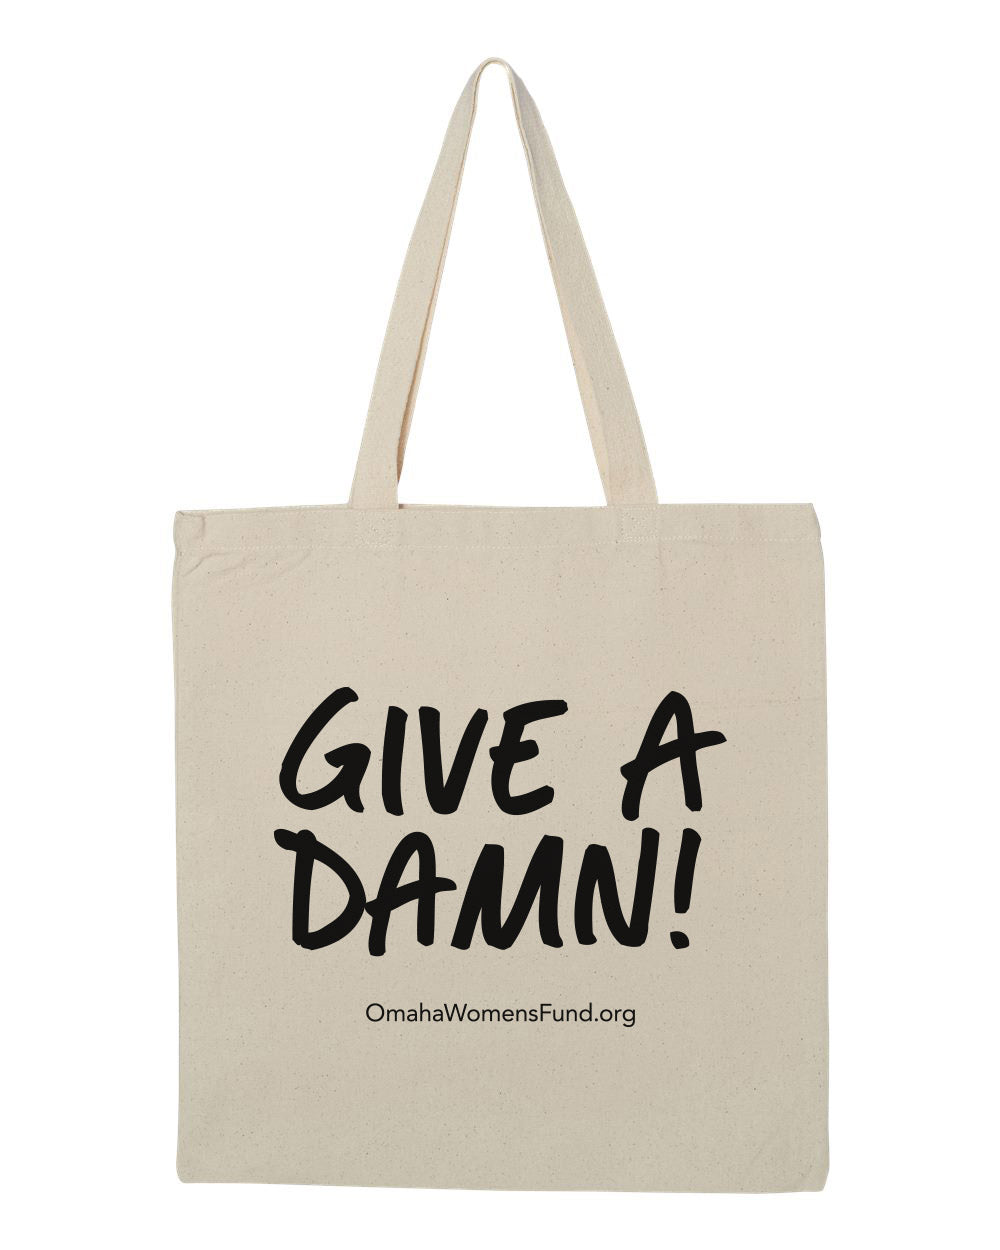 Women's Fund Of Omaha | Give A Damn! Tote